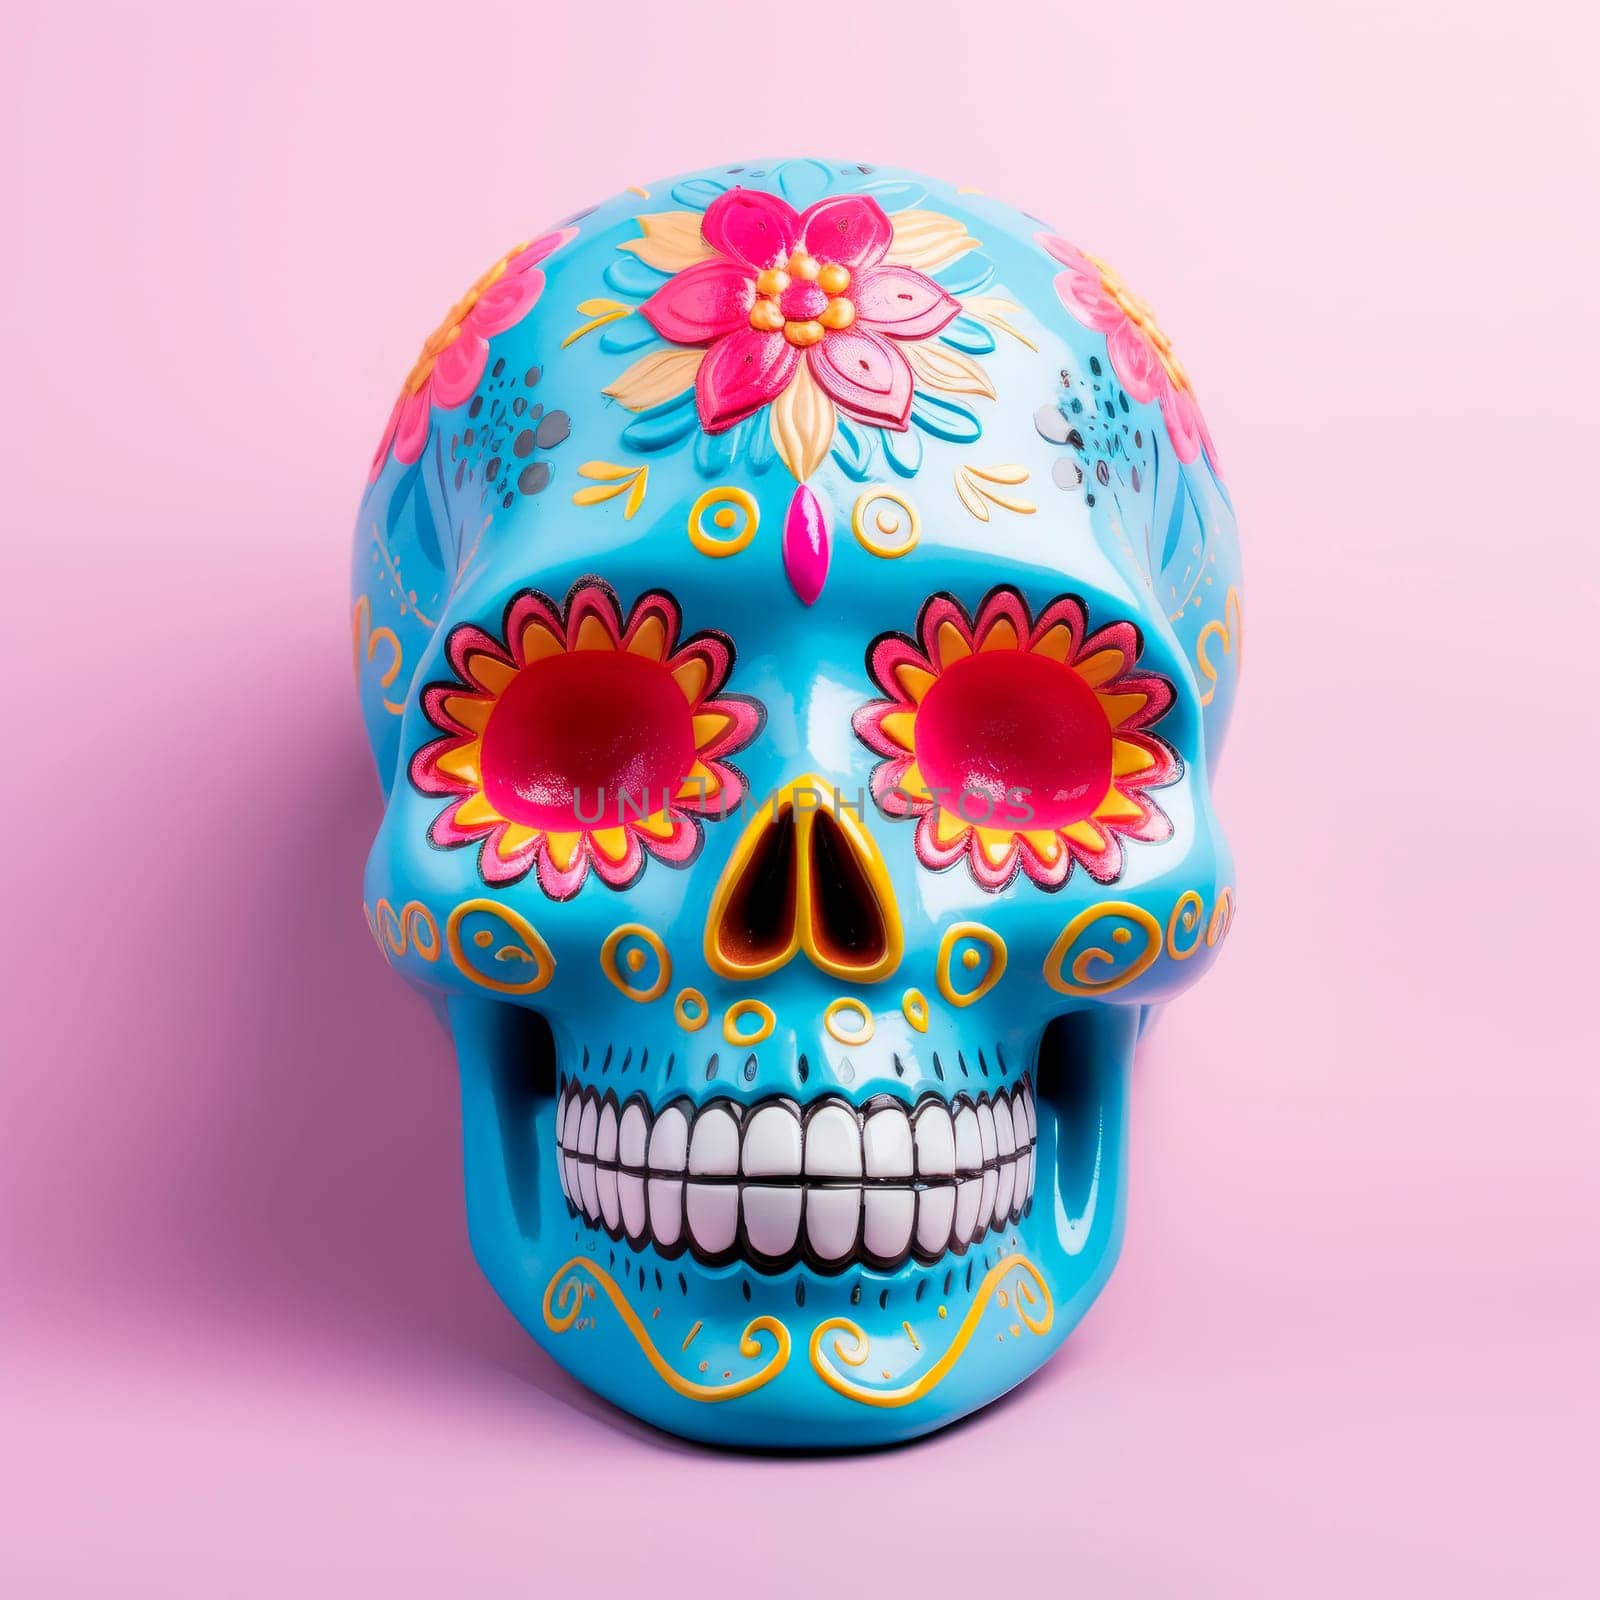 The bright sugarloaf skull is made in Mexican traditions. High quality photo